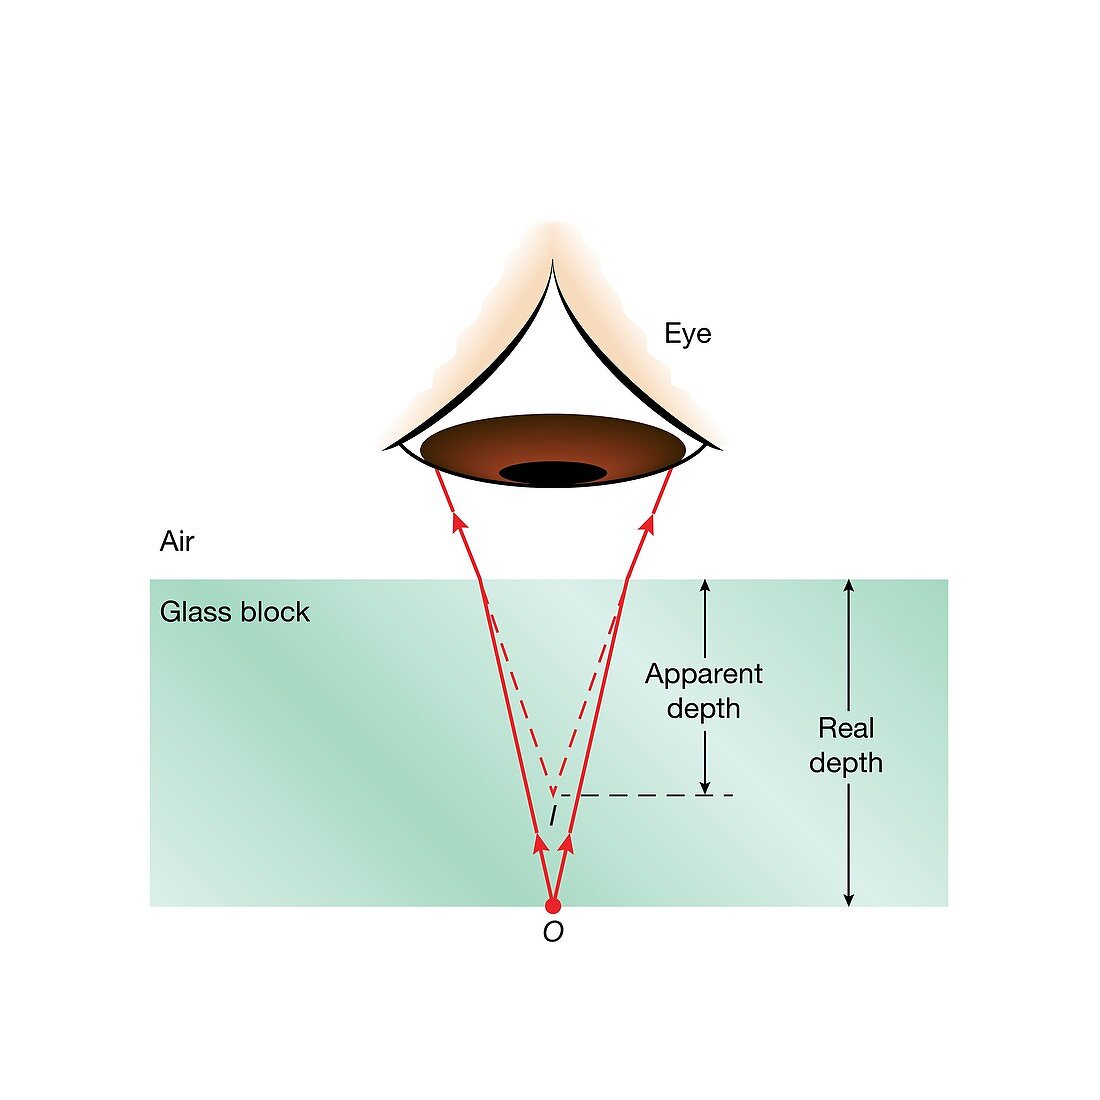 Refraction, real depth and apparent depth, illustration